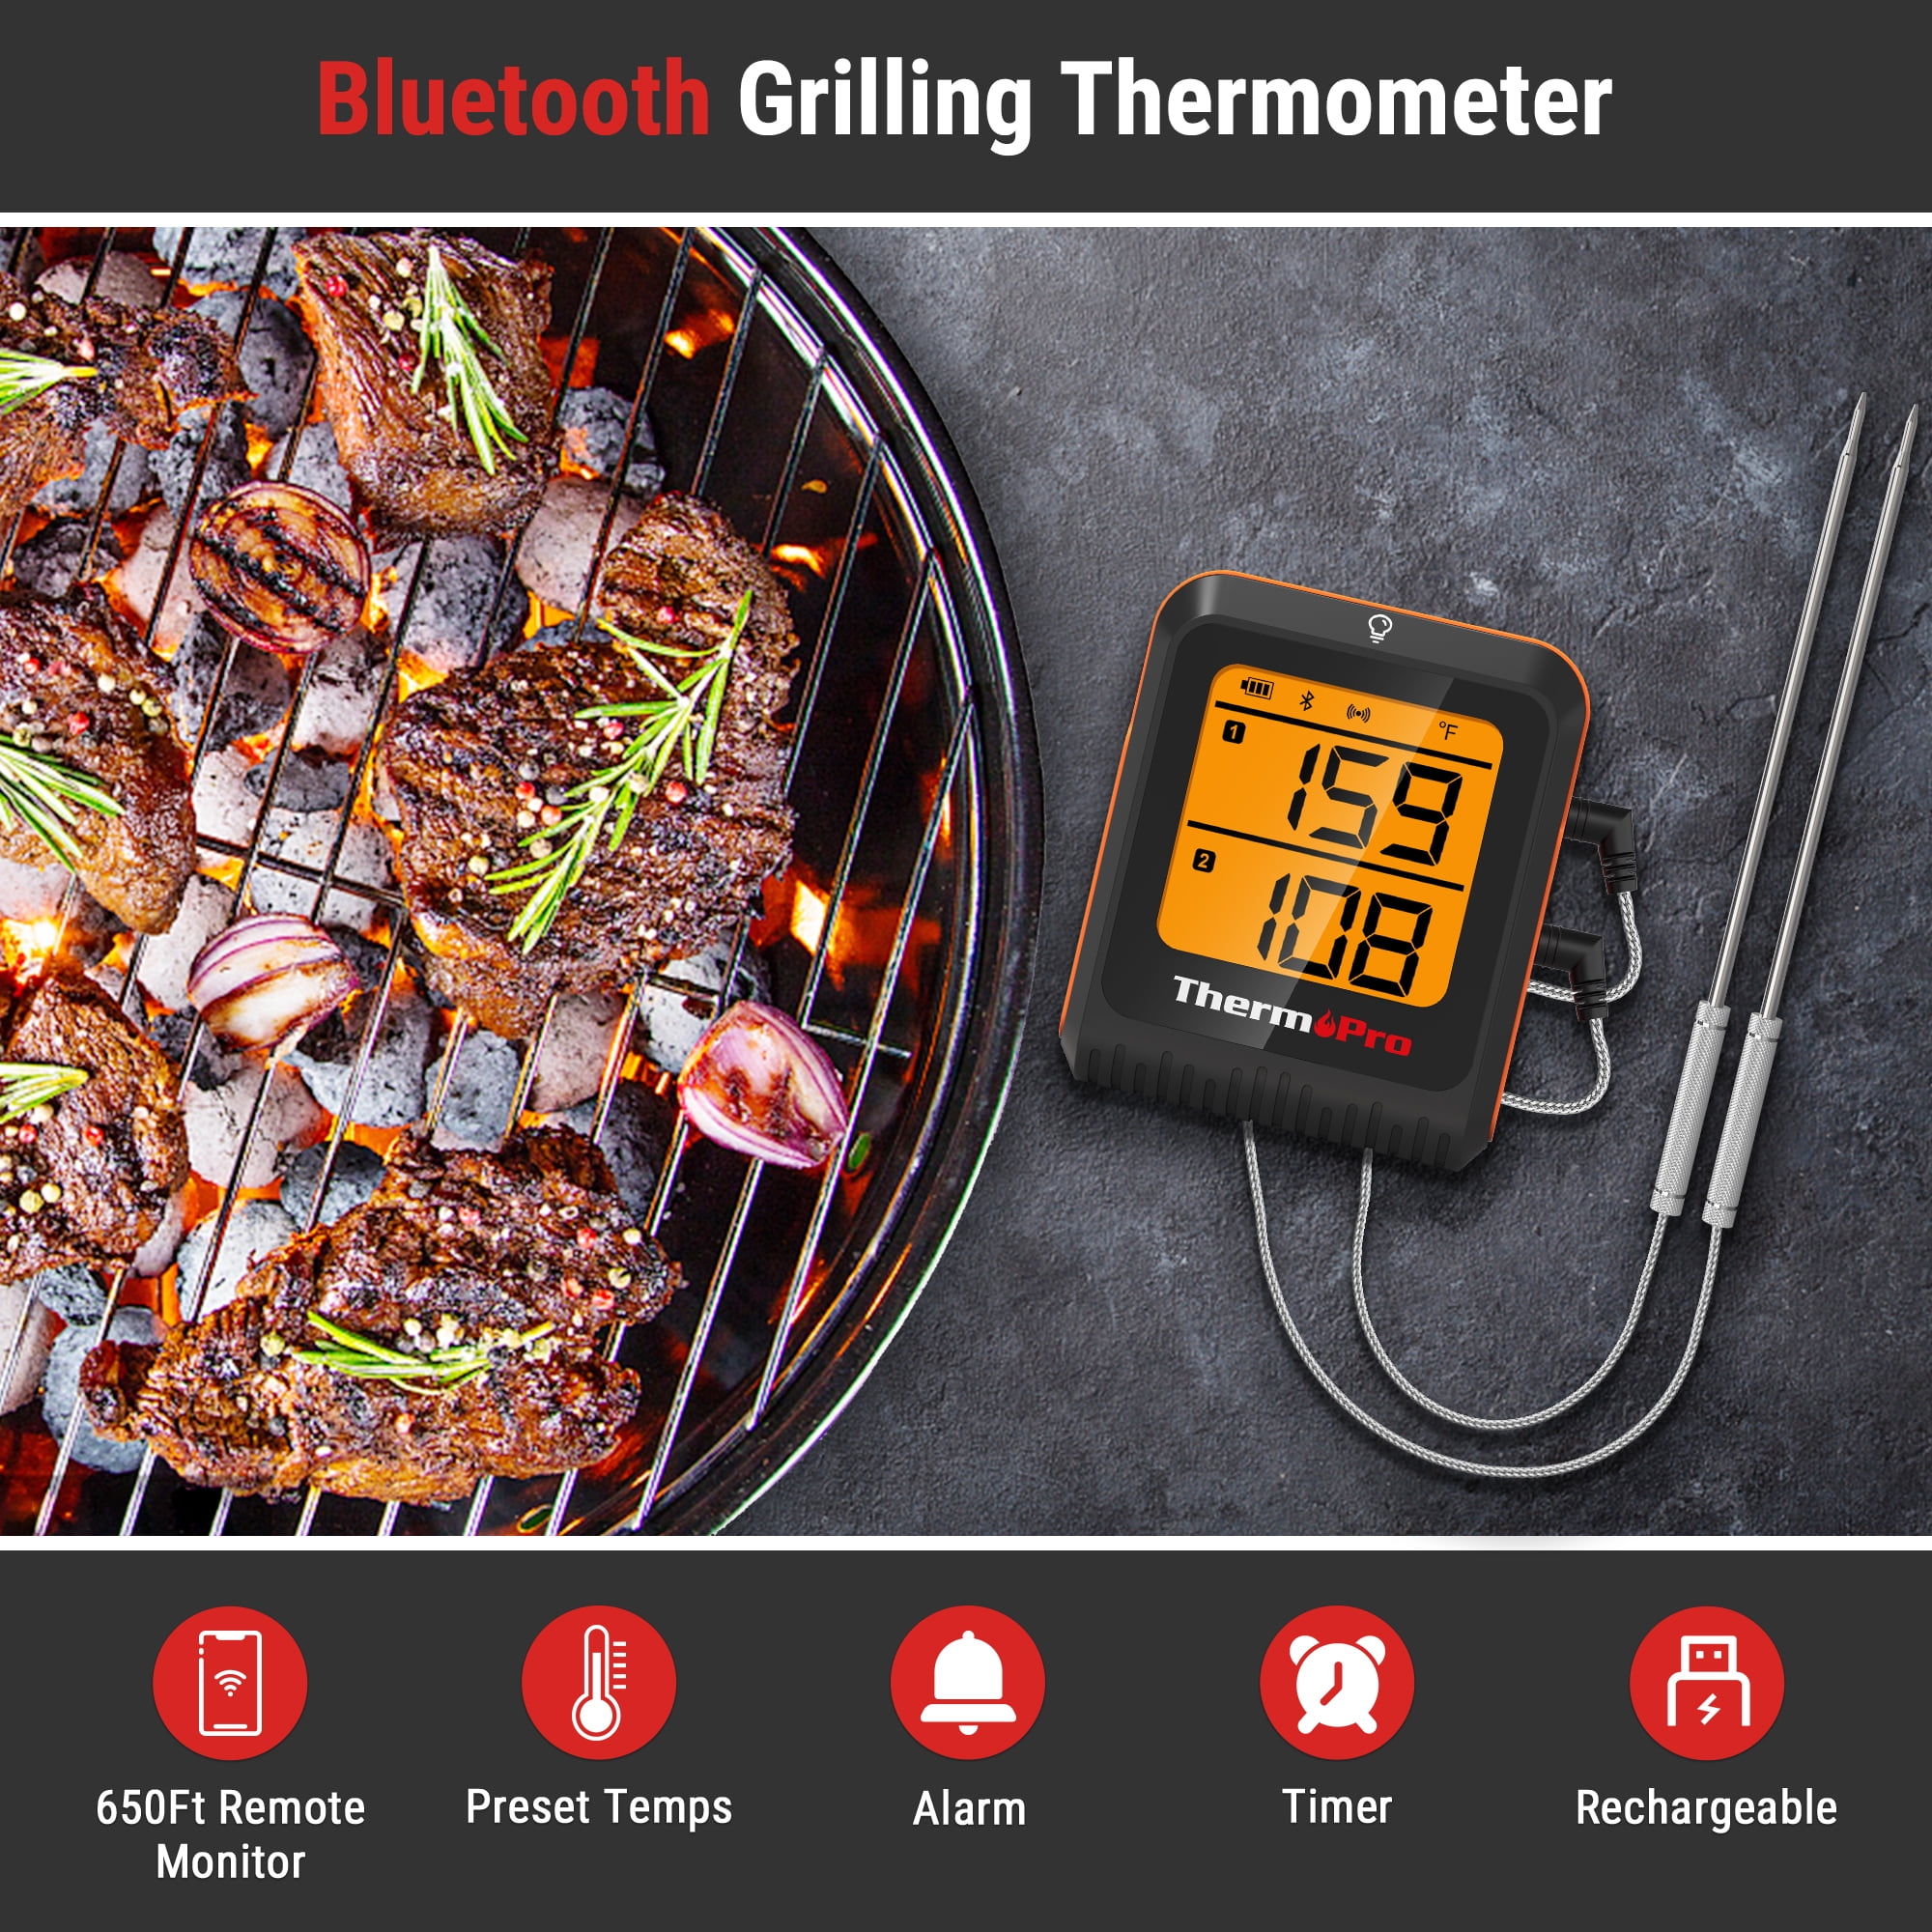 Thermopro Tp920 150m Wireless Meat Thermometer Kitchen Cooking